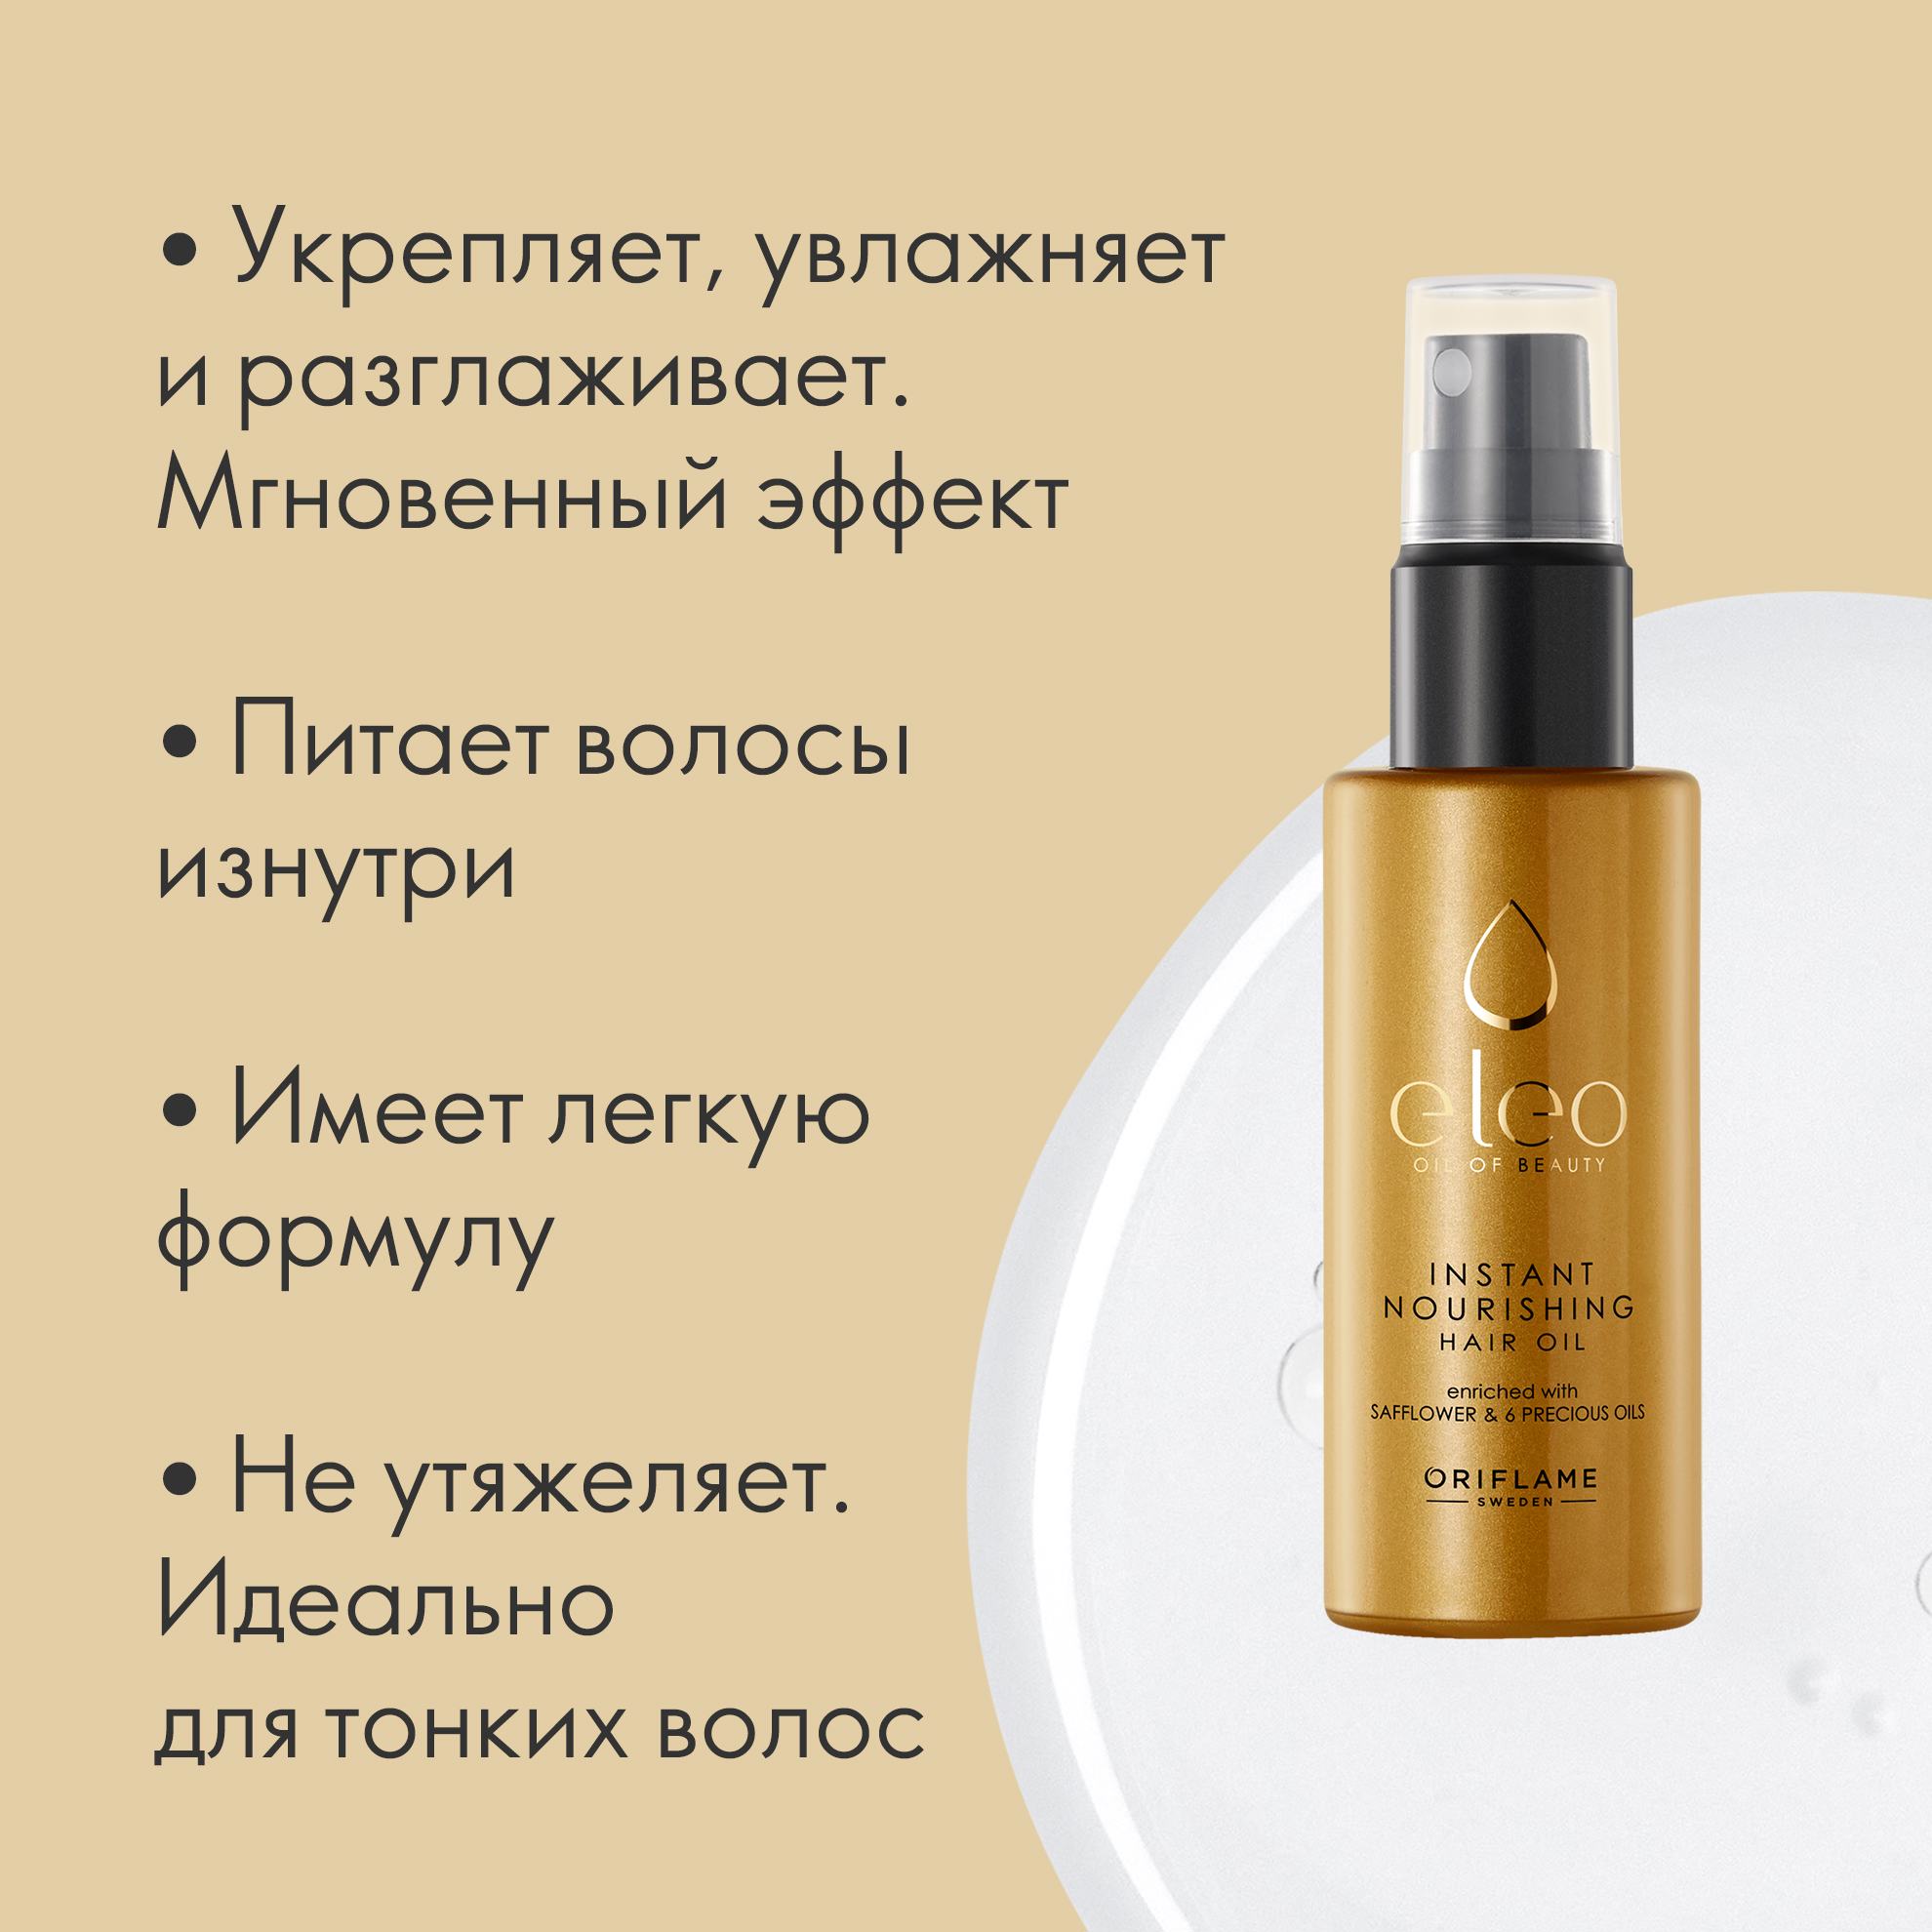 https://media-cdn.oriflame.com/productImage?externalMediaId=product-management-media%2fProducts%2f38600%2fBY%2f38600_3.png&id=15404489&version=1